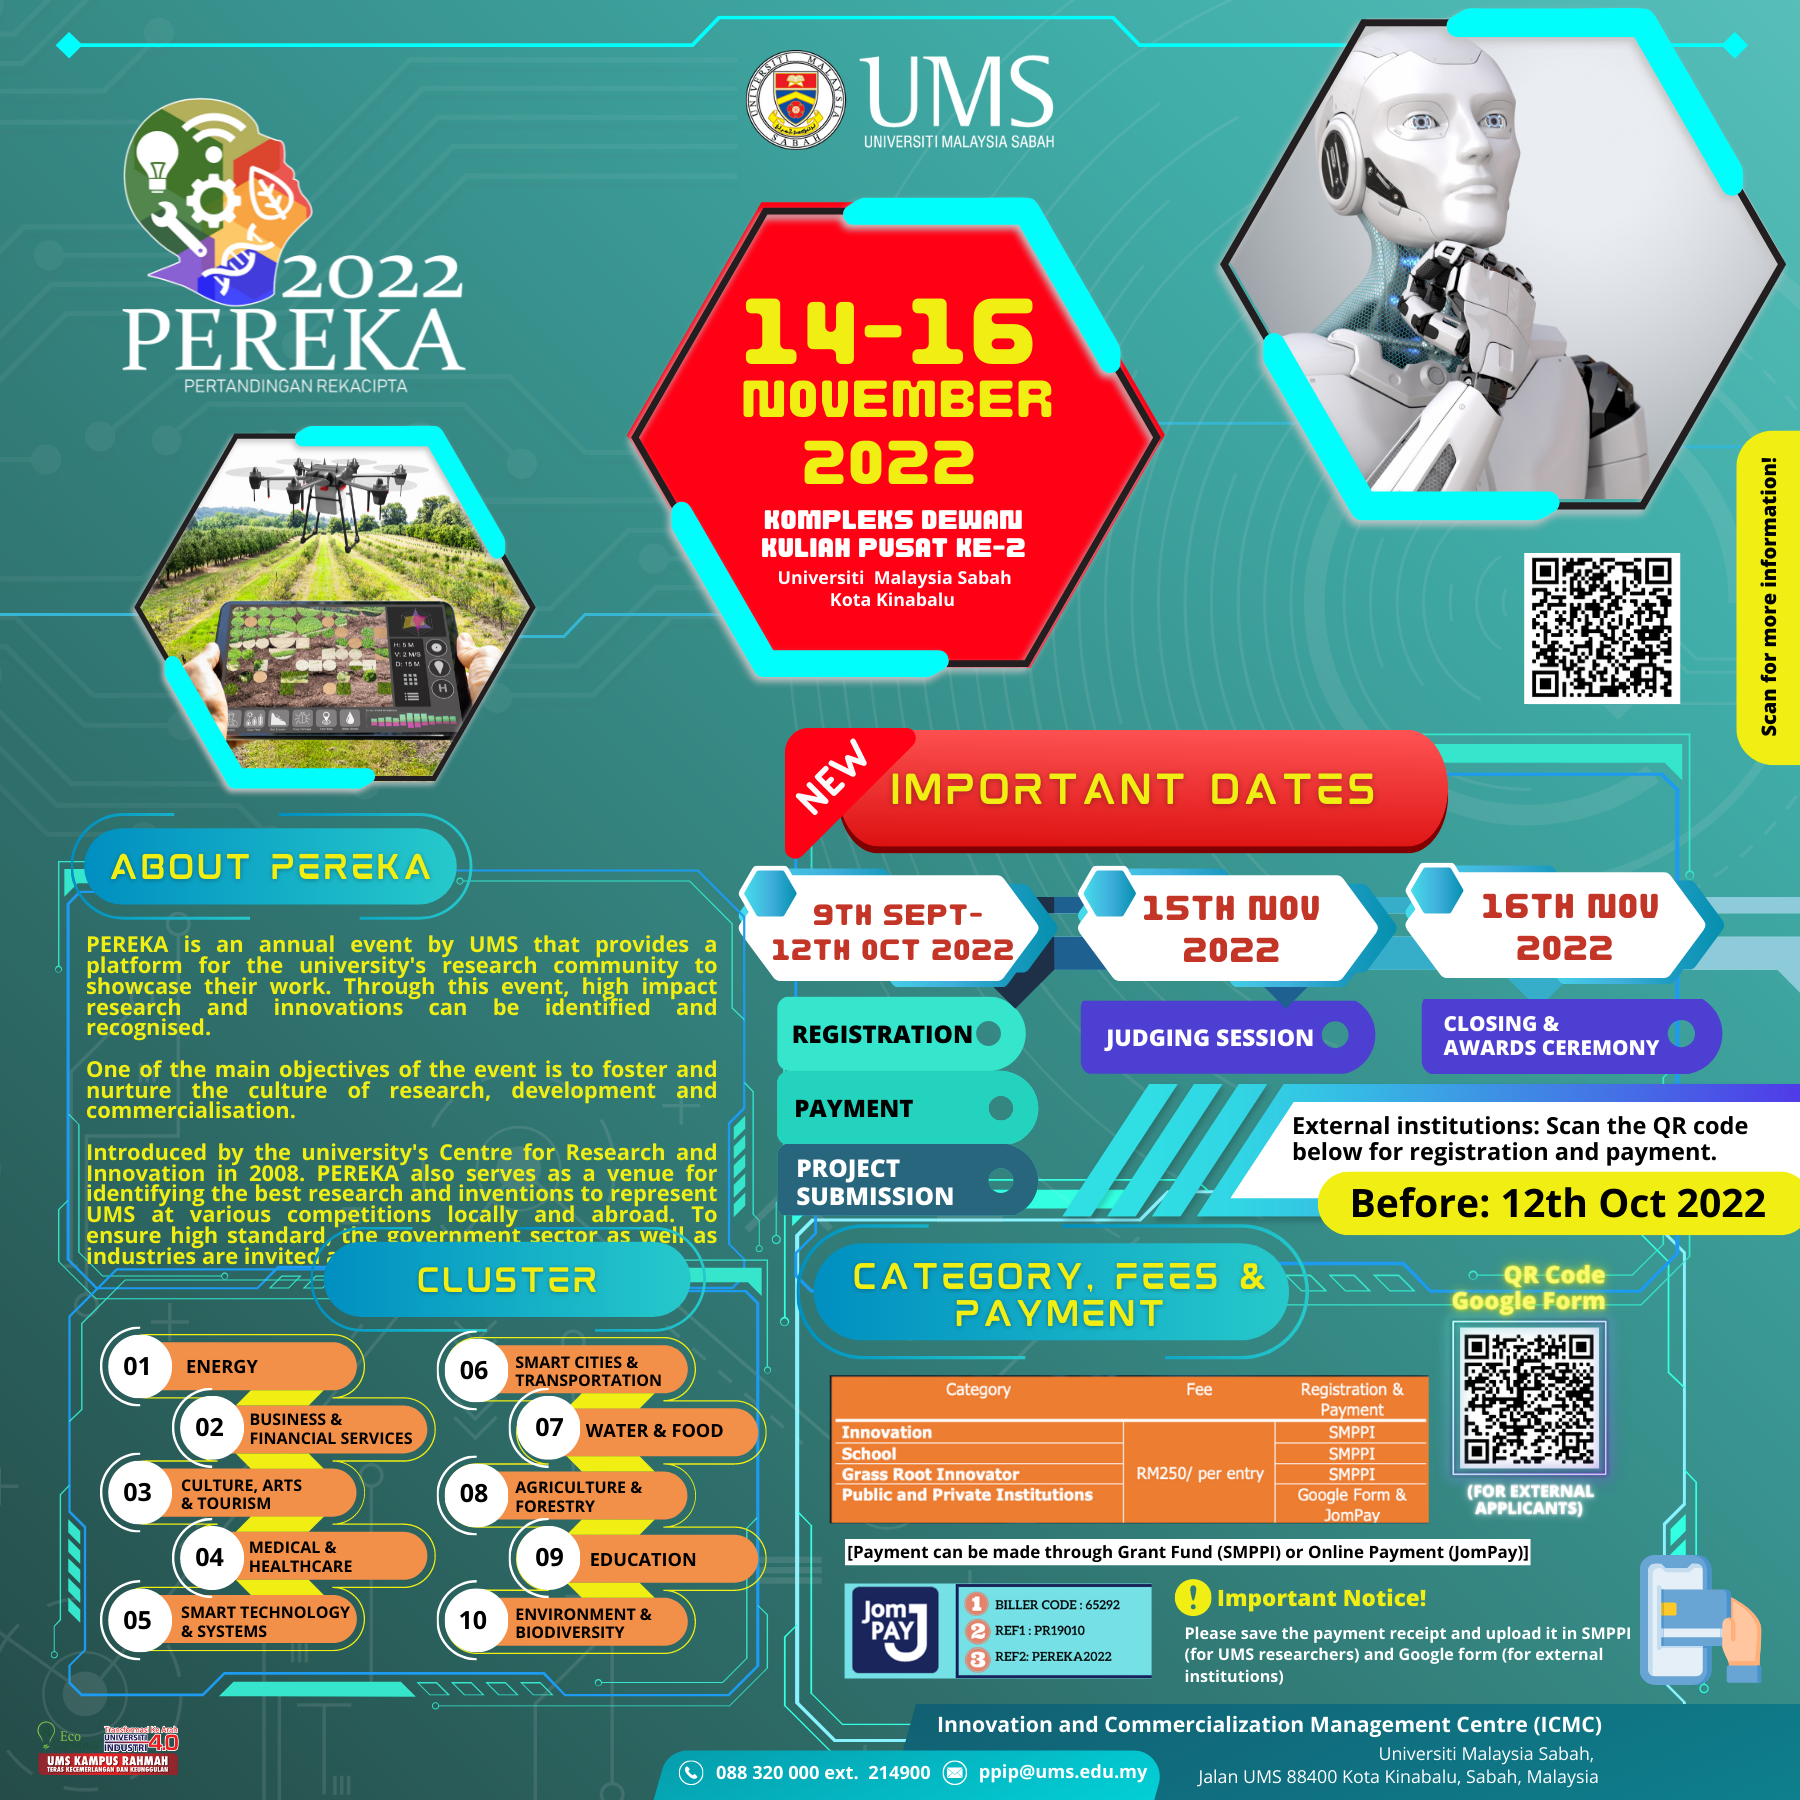 NEW DATES: CALLING FOR PARTICIPANTS IN PEREKA 2022!